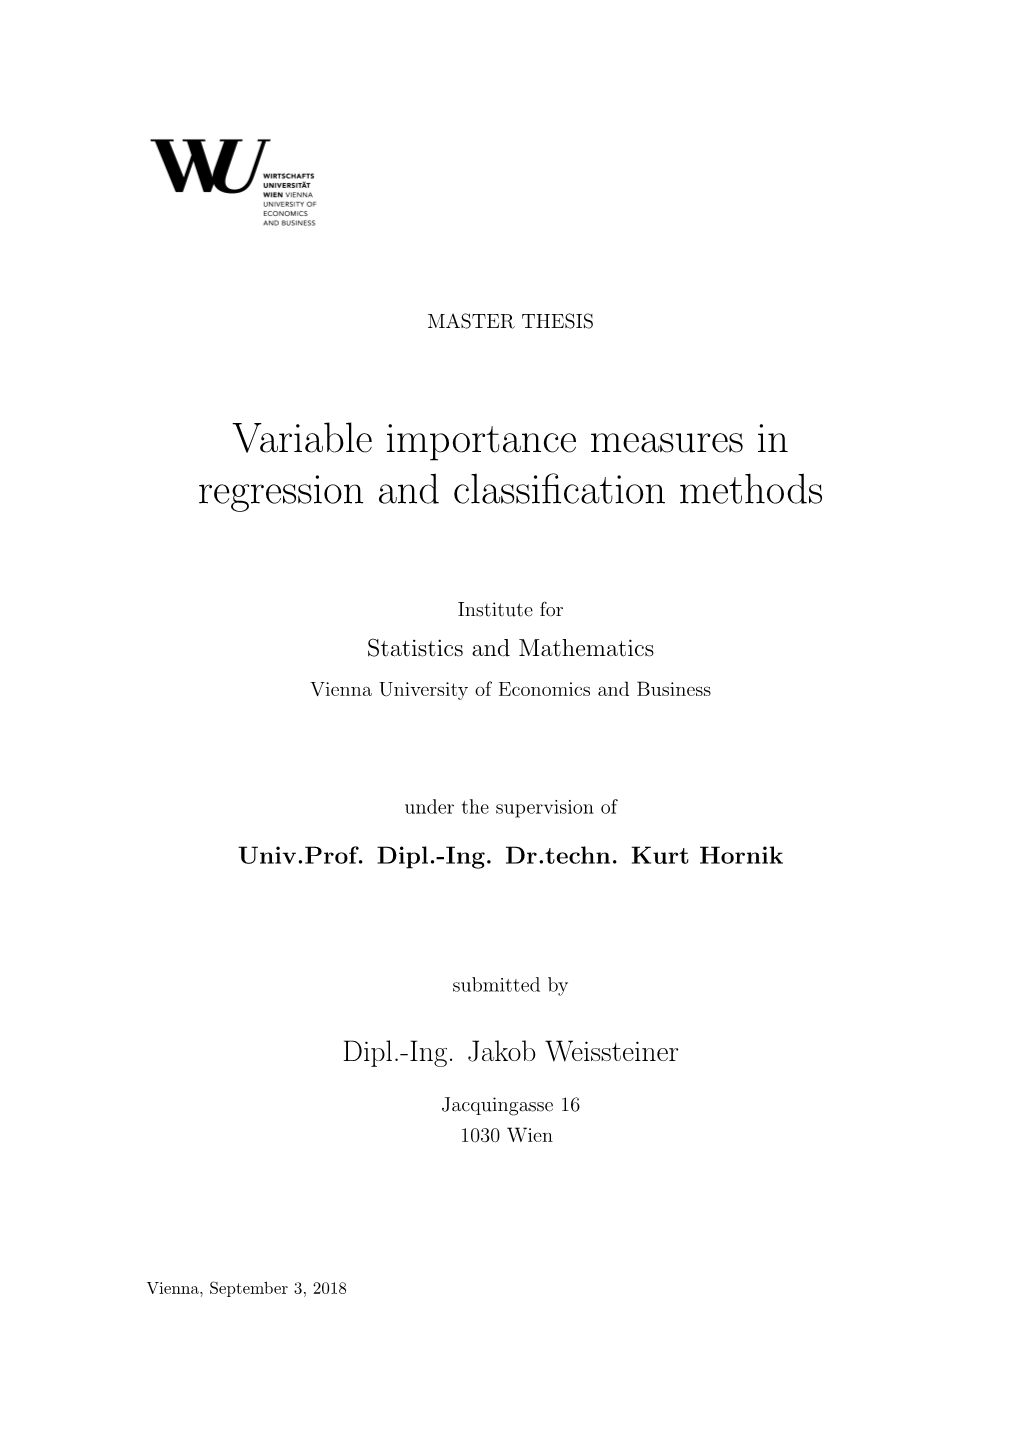 Variable Importance Measures in Regression and Classification Methods